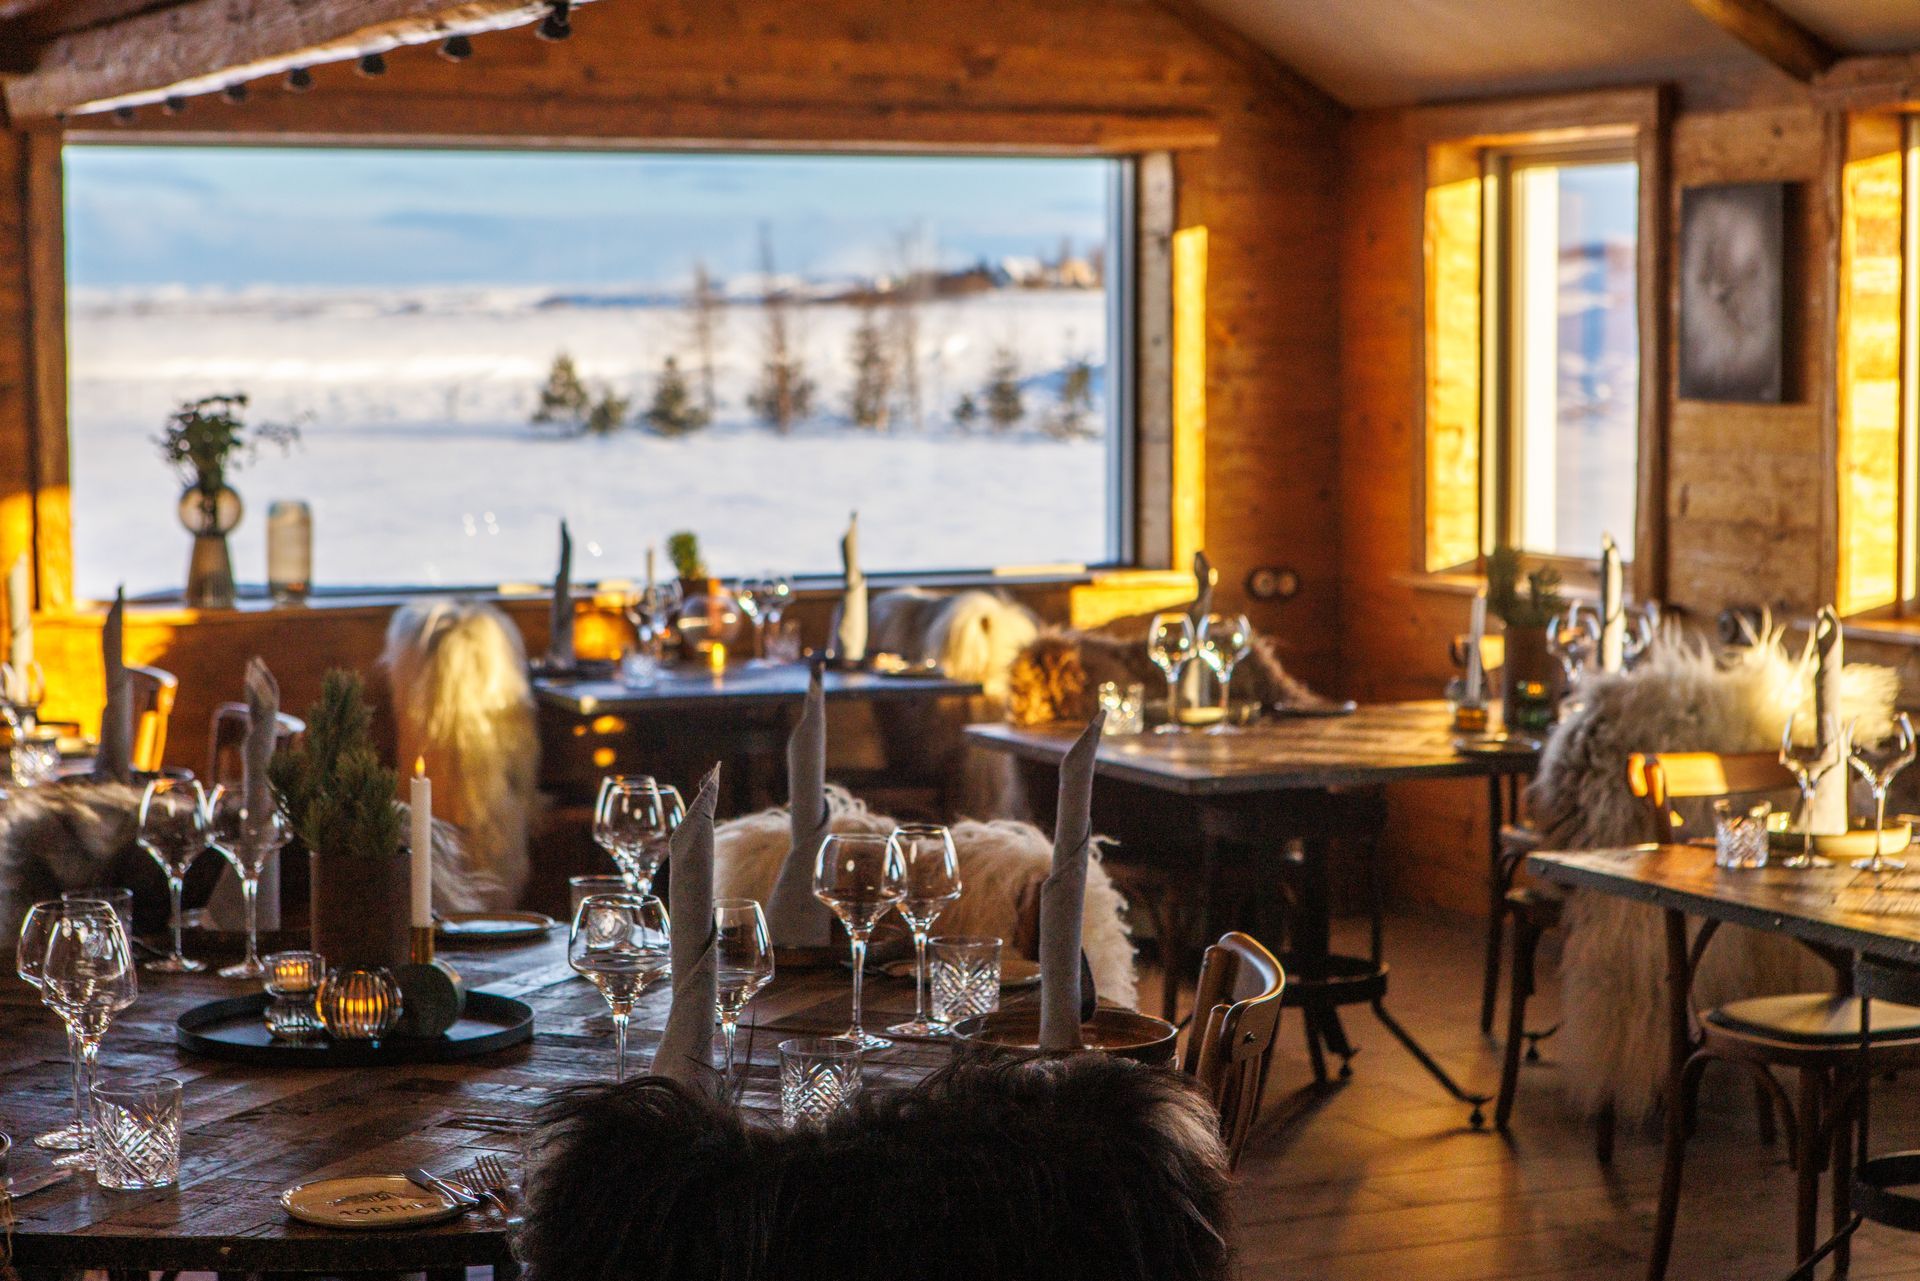 Turfhouse retreat in iceland, dining experience with cultural icelandic cusine